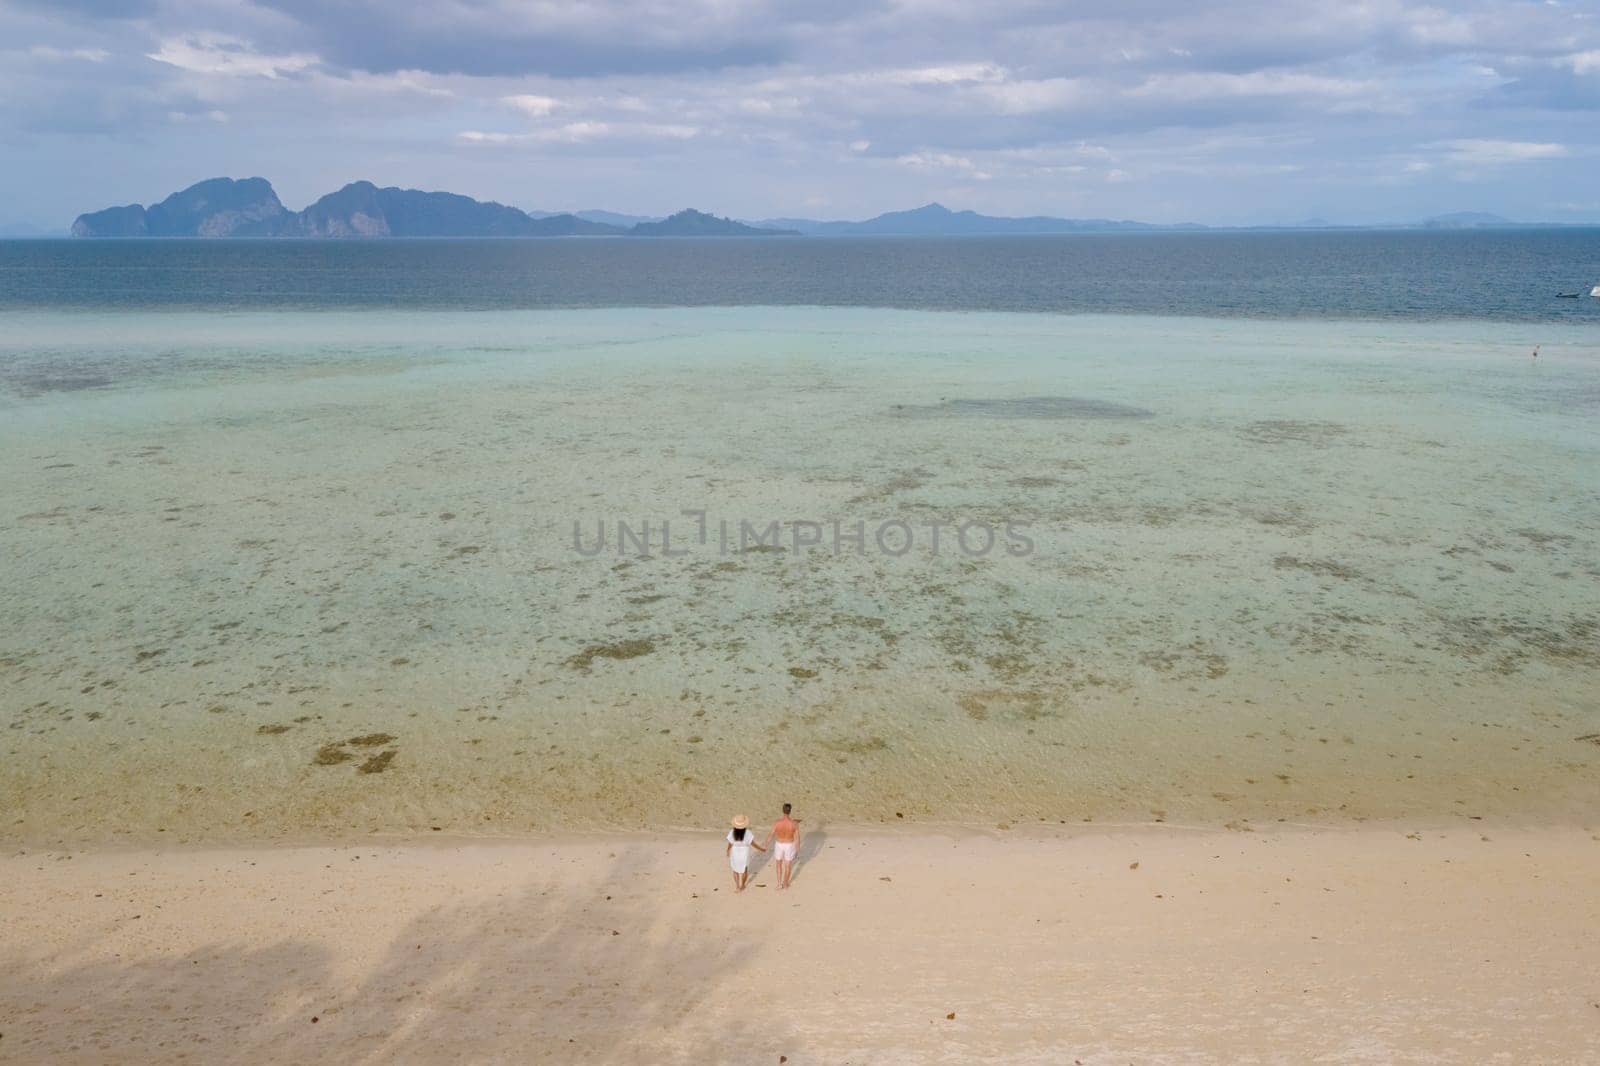 oh Kradan a tropical island with palm trees soft white sand, and a turqouse colored ocean, couple standing by the ocean in Koh Kradan Trang Thailand